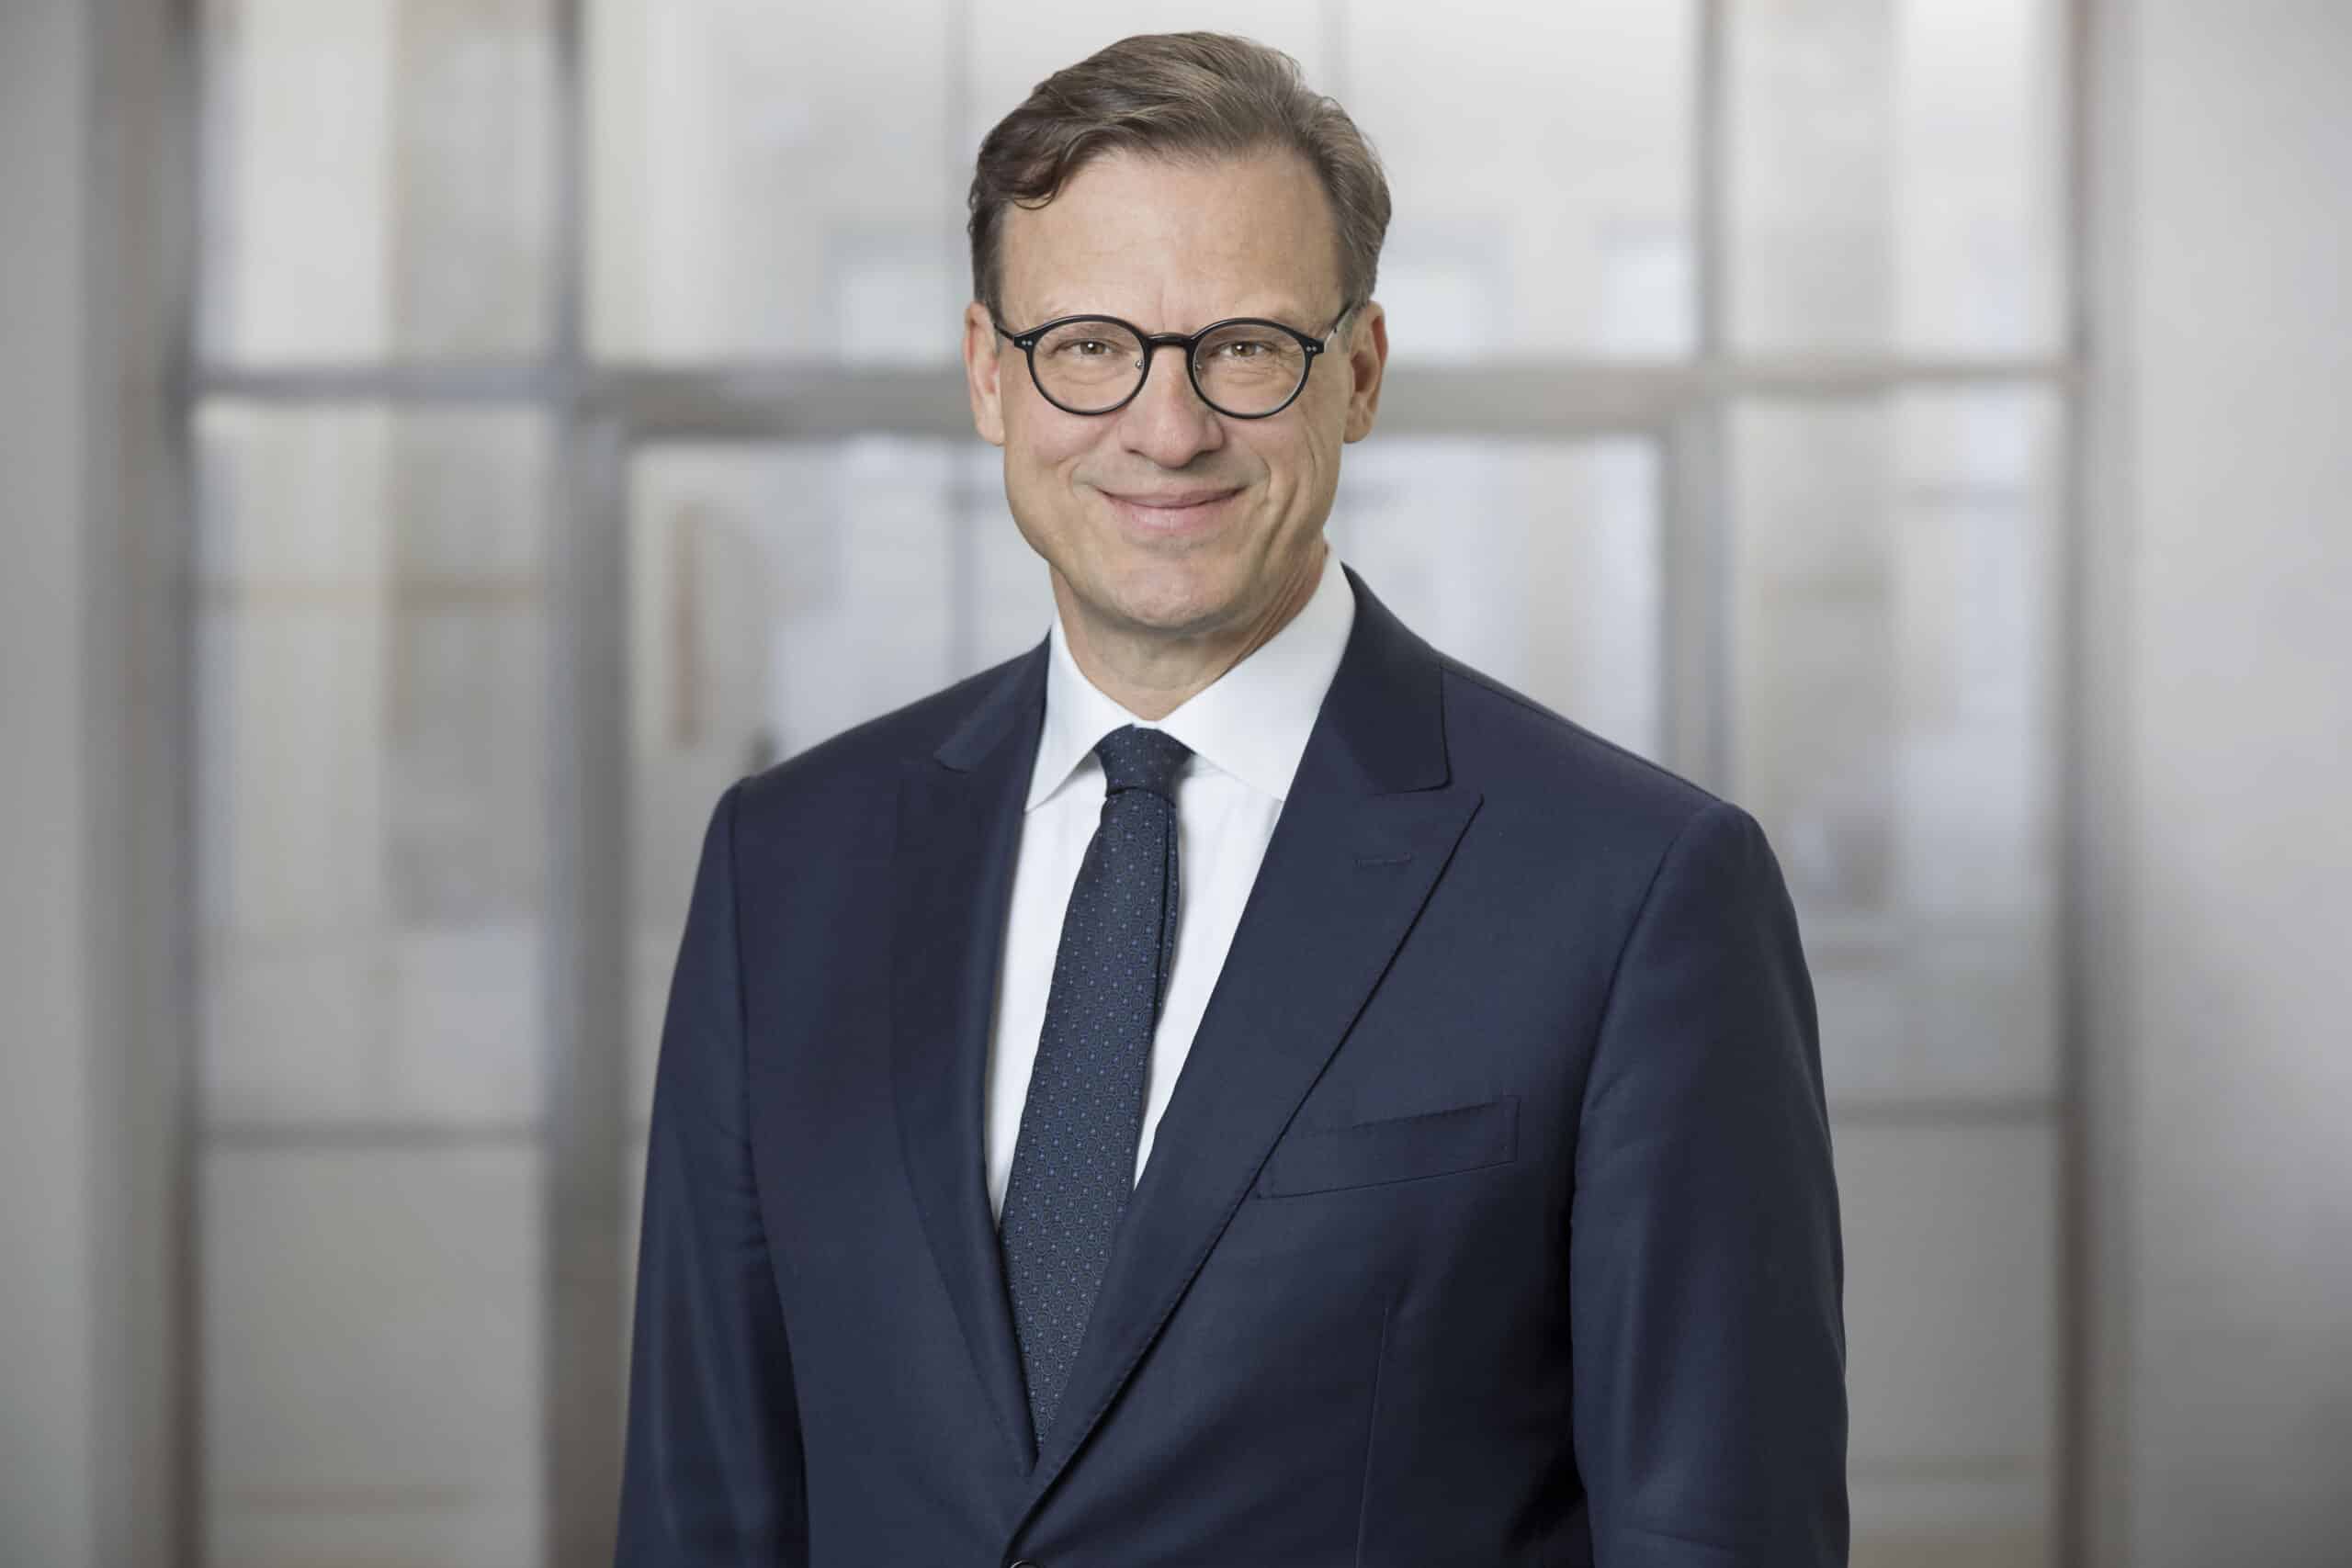 Swiss Life Group Chief Executive Officer Patrick Frost.